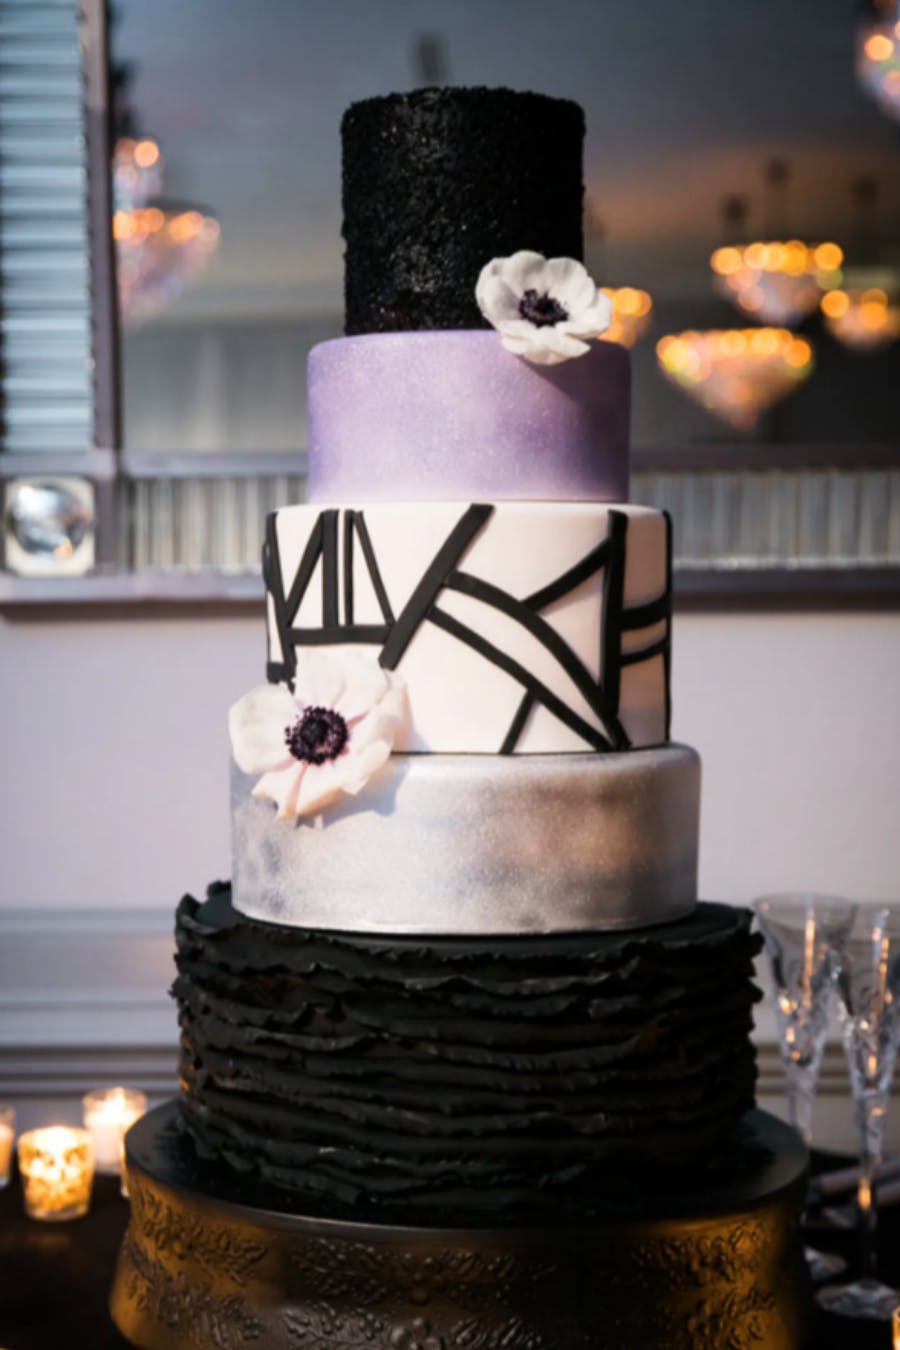 17 Wedding Cakes That You Thought Only Existed In Your Dreams